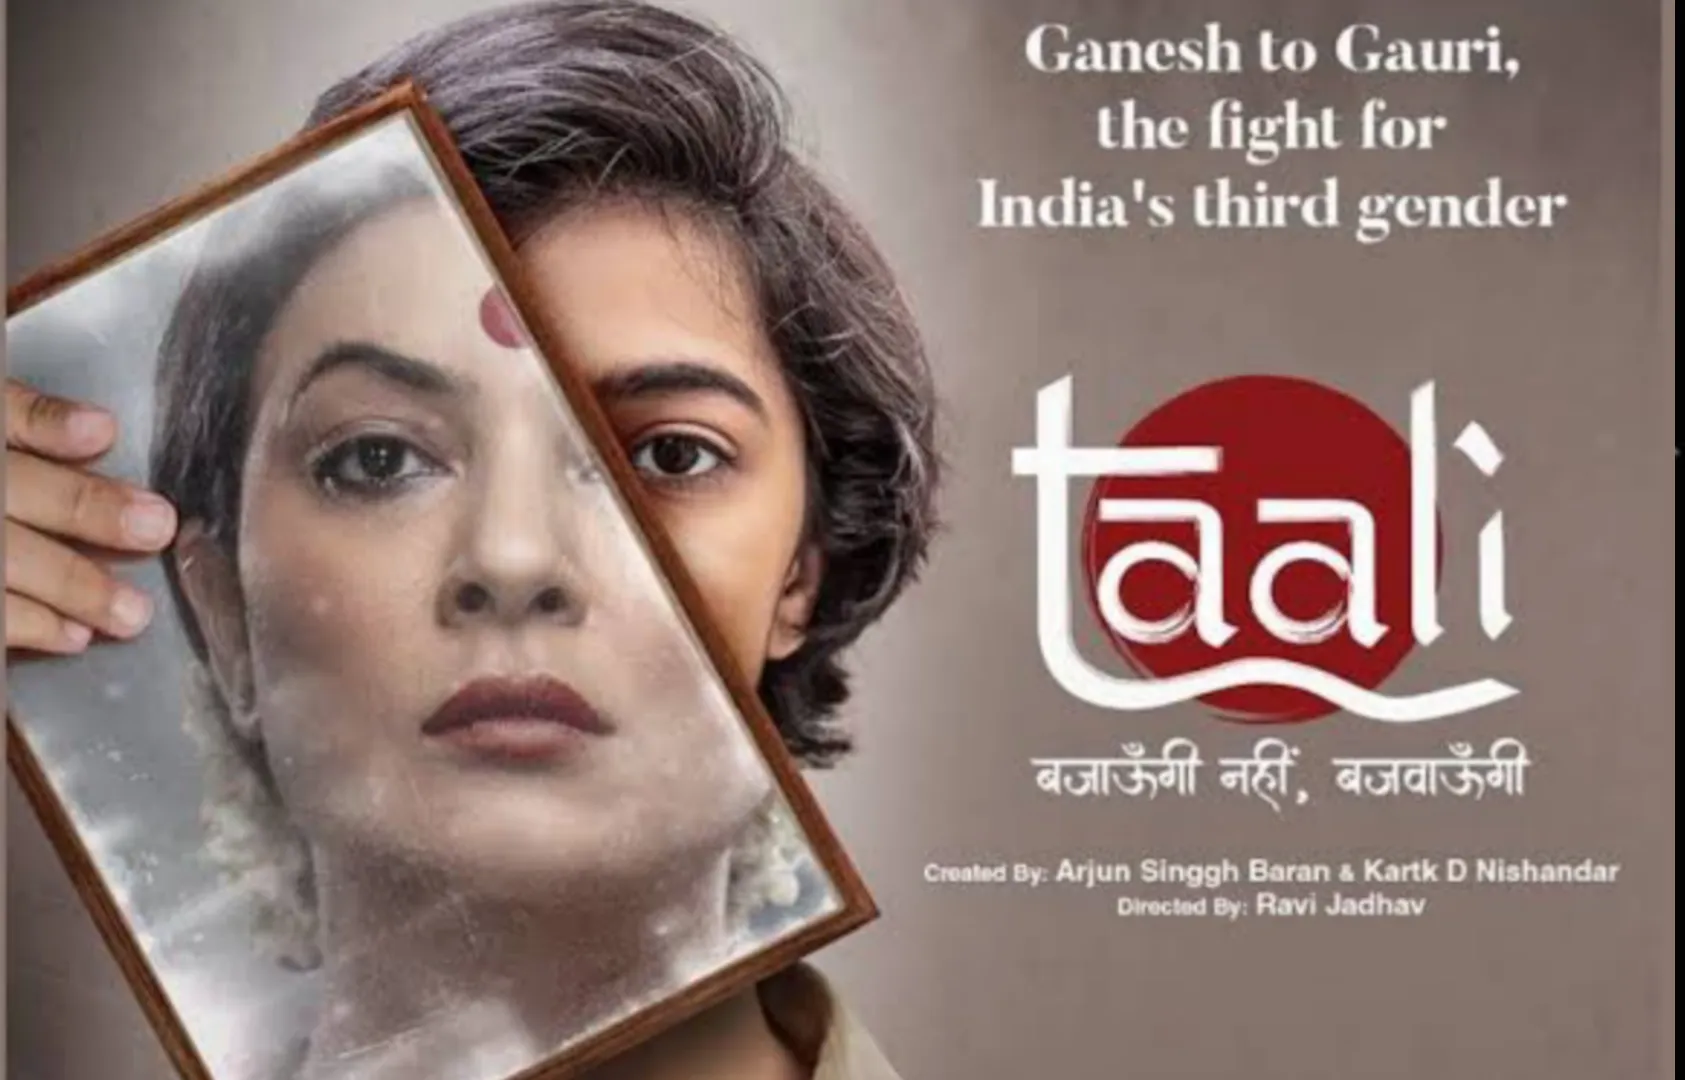 Taali Review